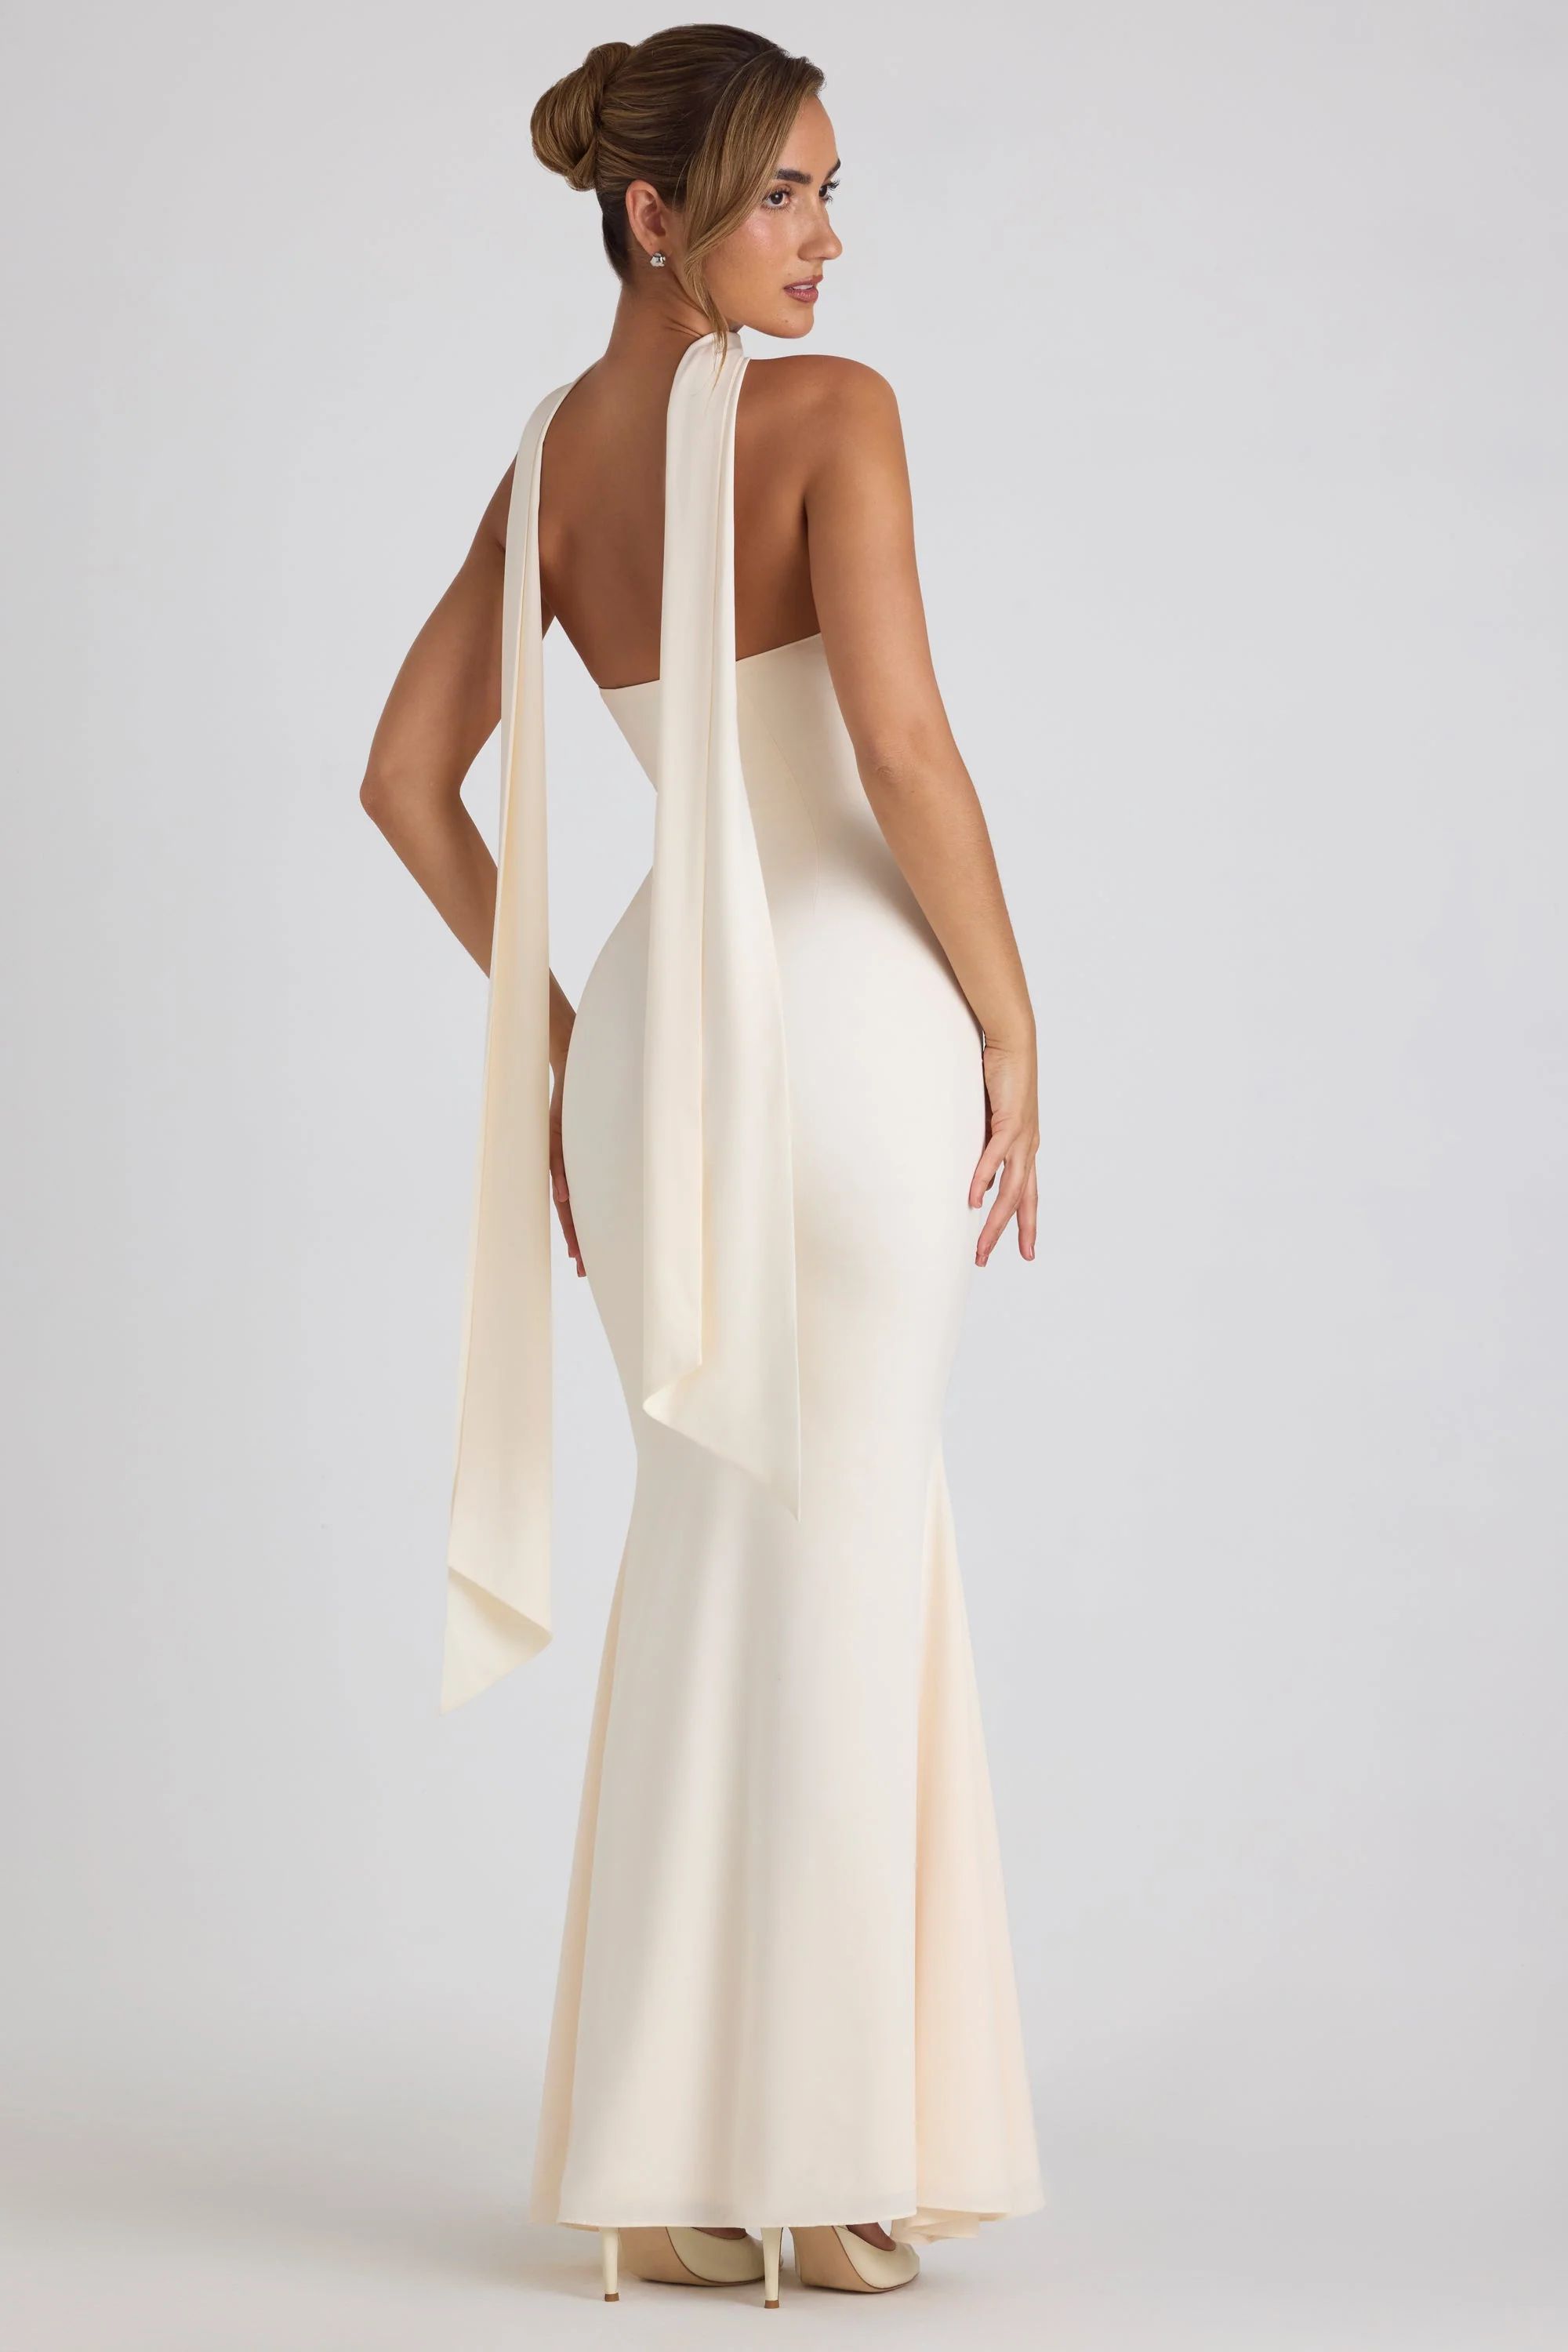 Scarf-Detail Strapless Gown in Ivory | Oh Polly